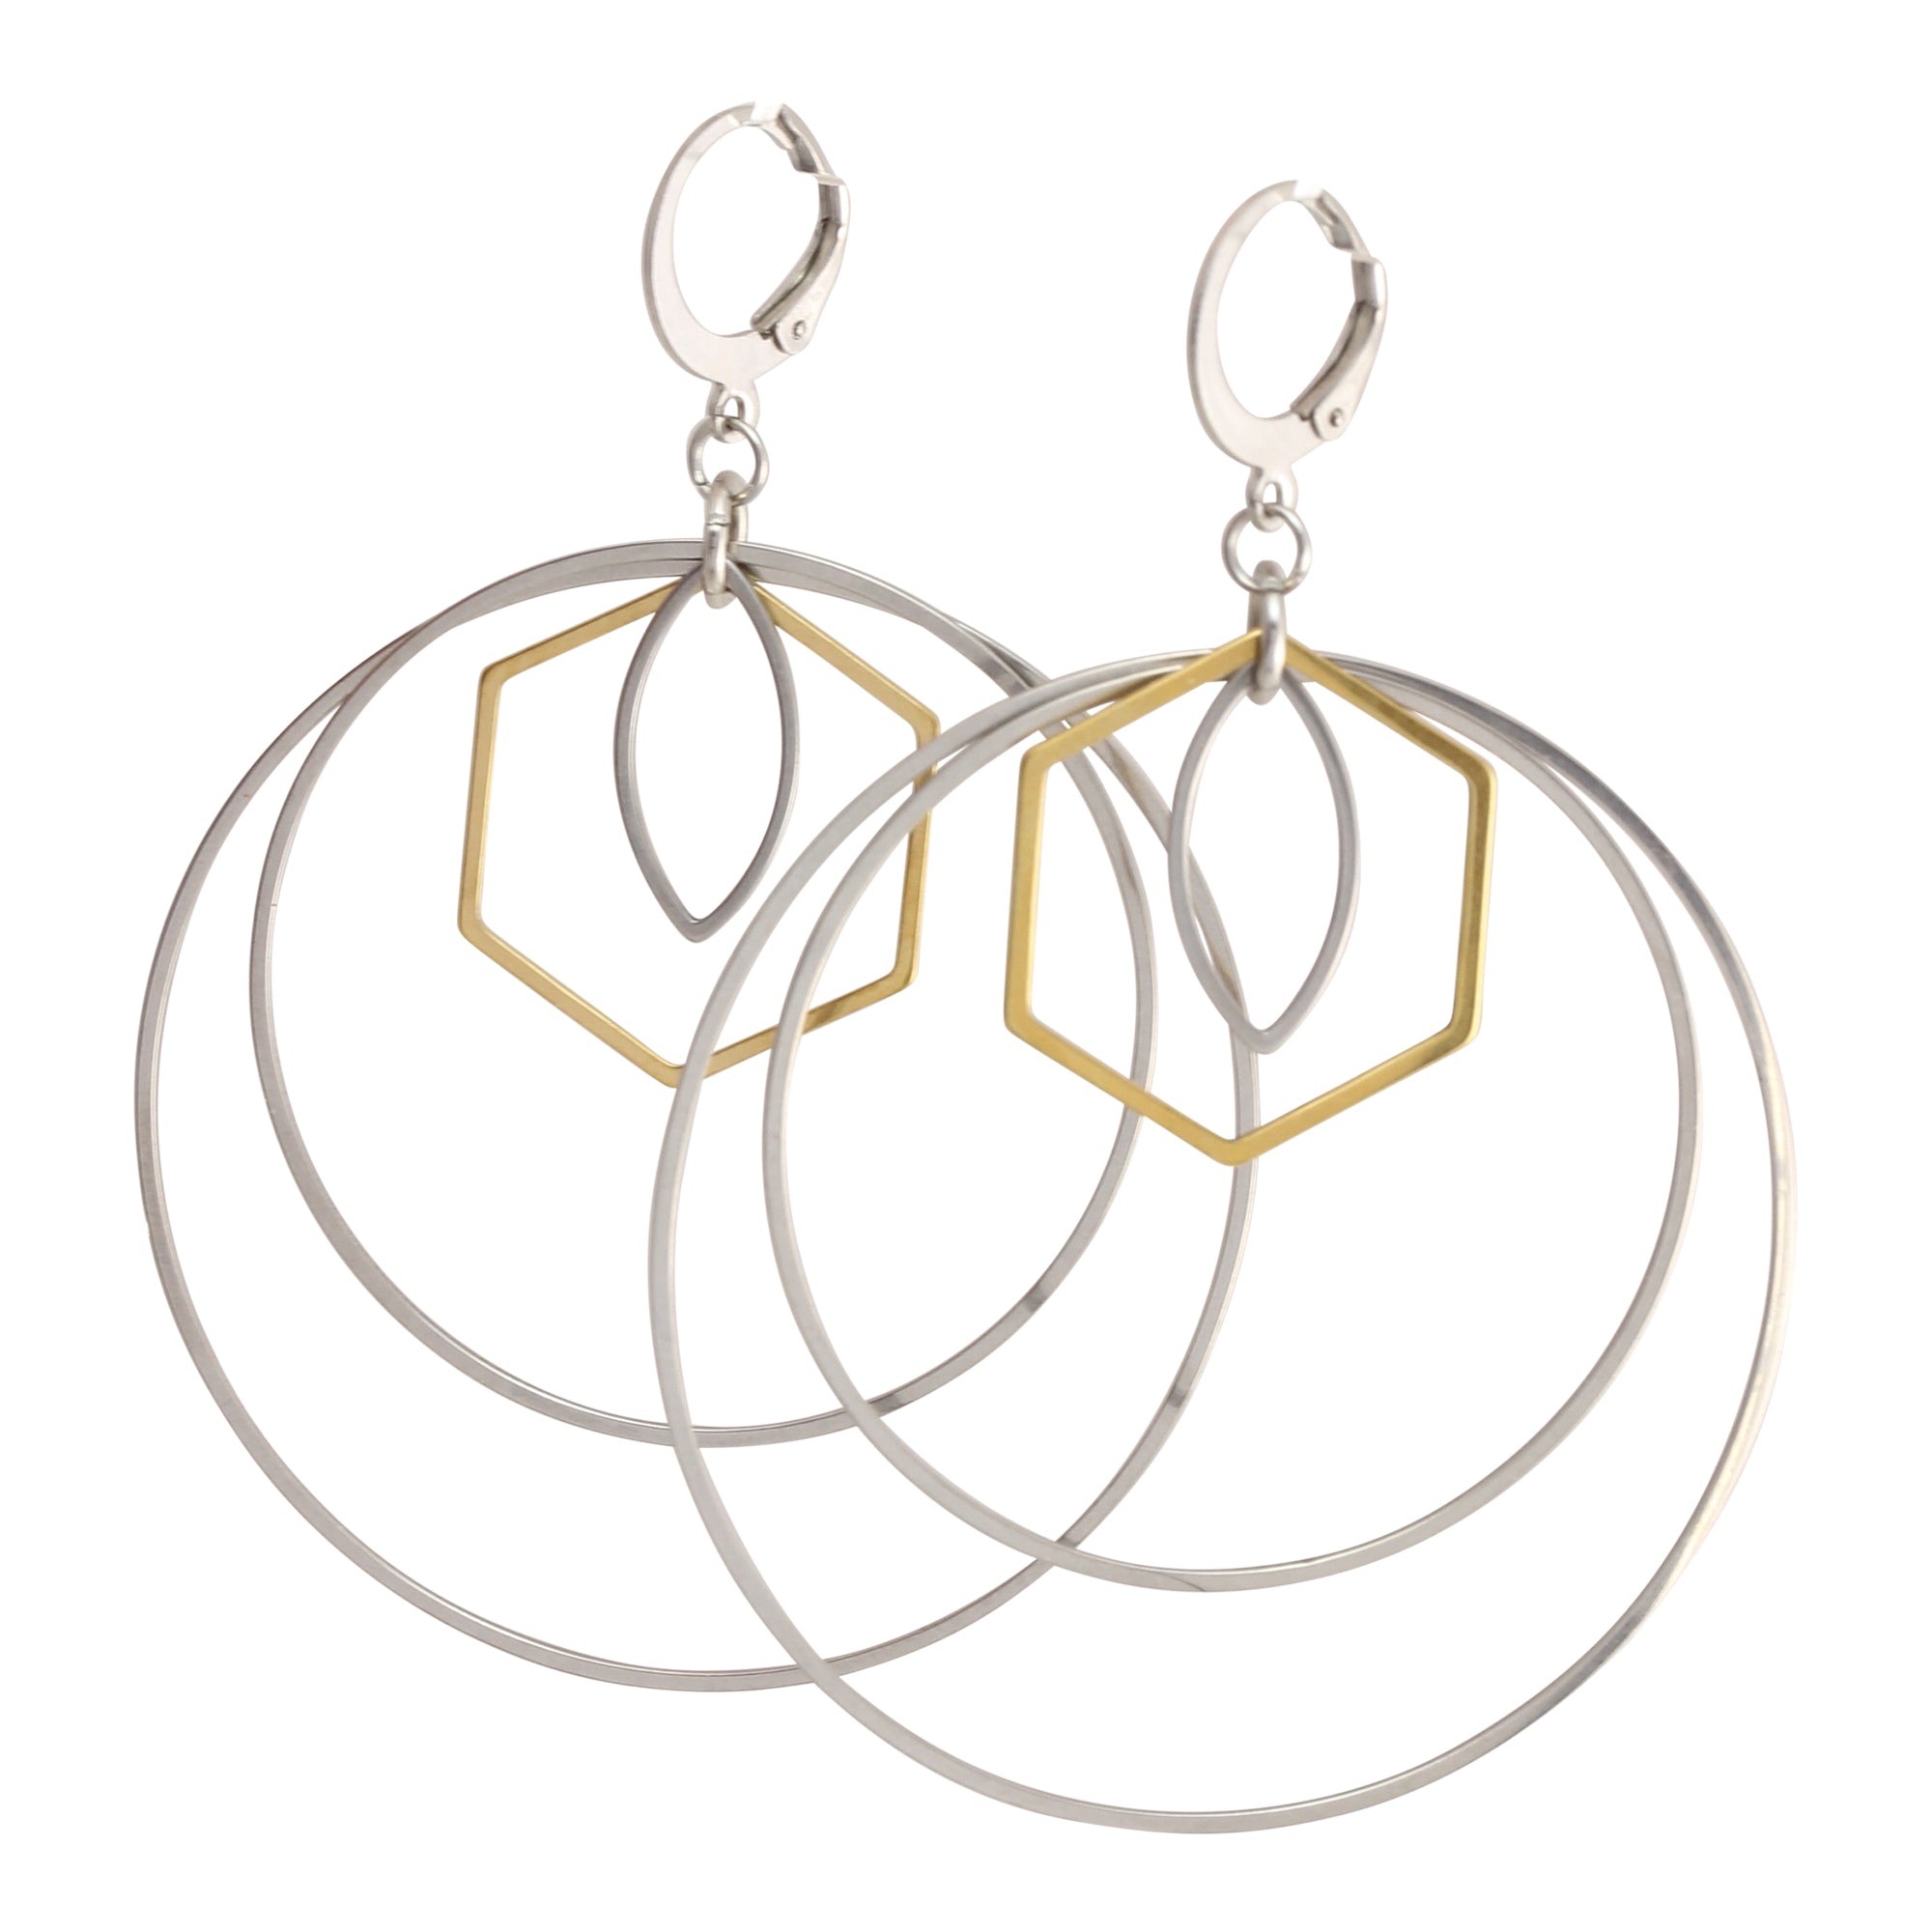 Waterproof "Imperméable” Large Luxe Hoops in Silver and Gold